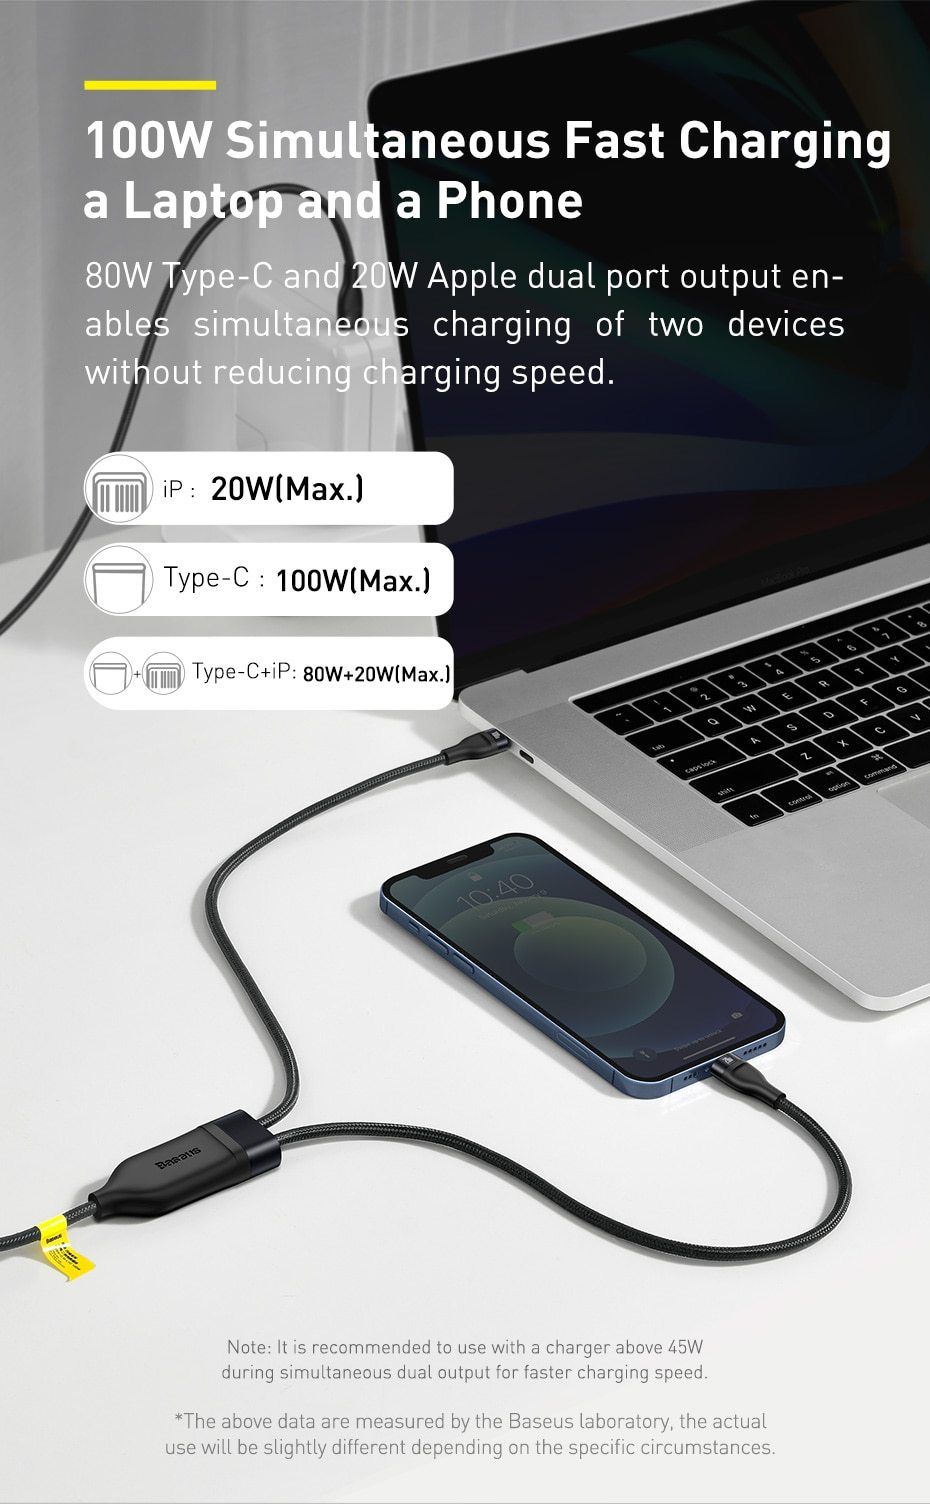 Baseus PD 100W USB Type C Cable For MacBook Pro 2 in 1 Fast Charging USBC Phone Charger Date Cable Baseus